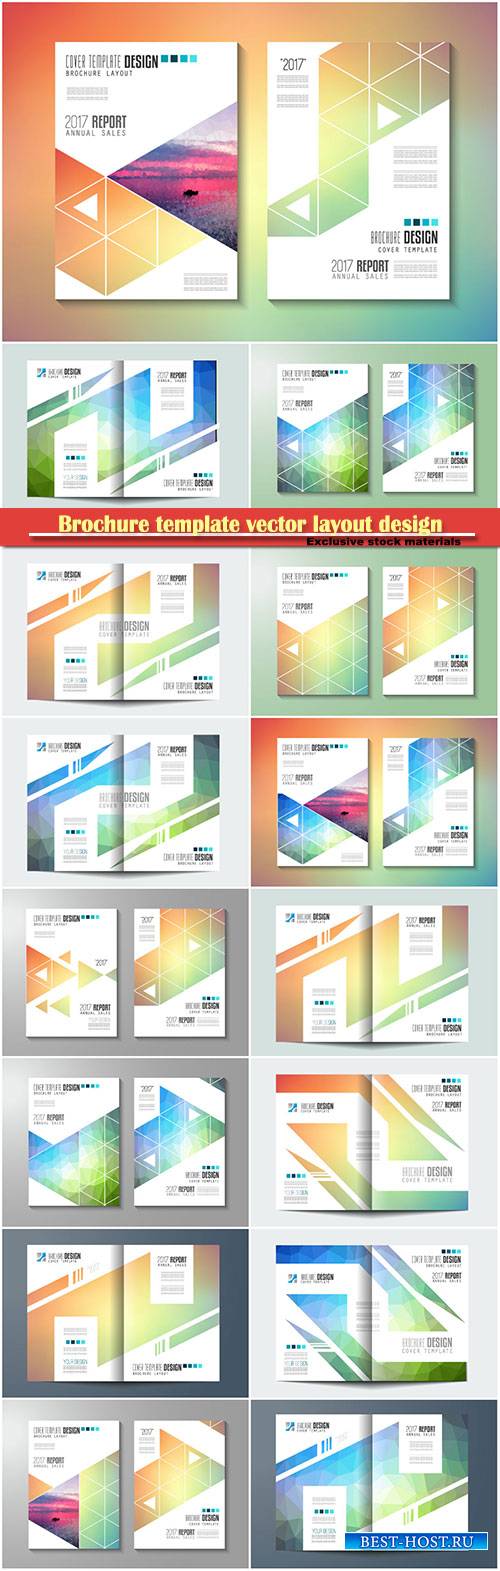 Brochure template vector layout design, corporate business annual report, magazine, flyer mockup # 128